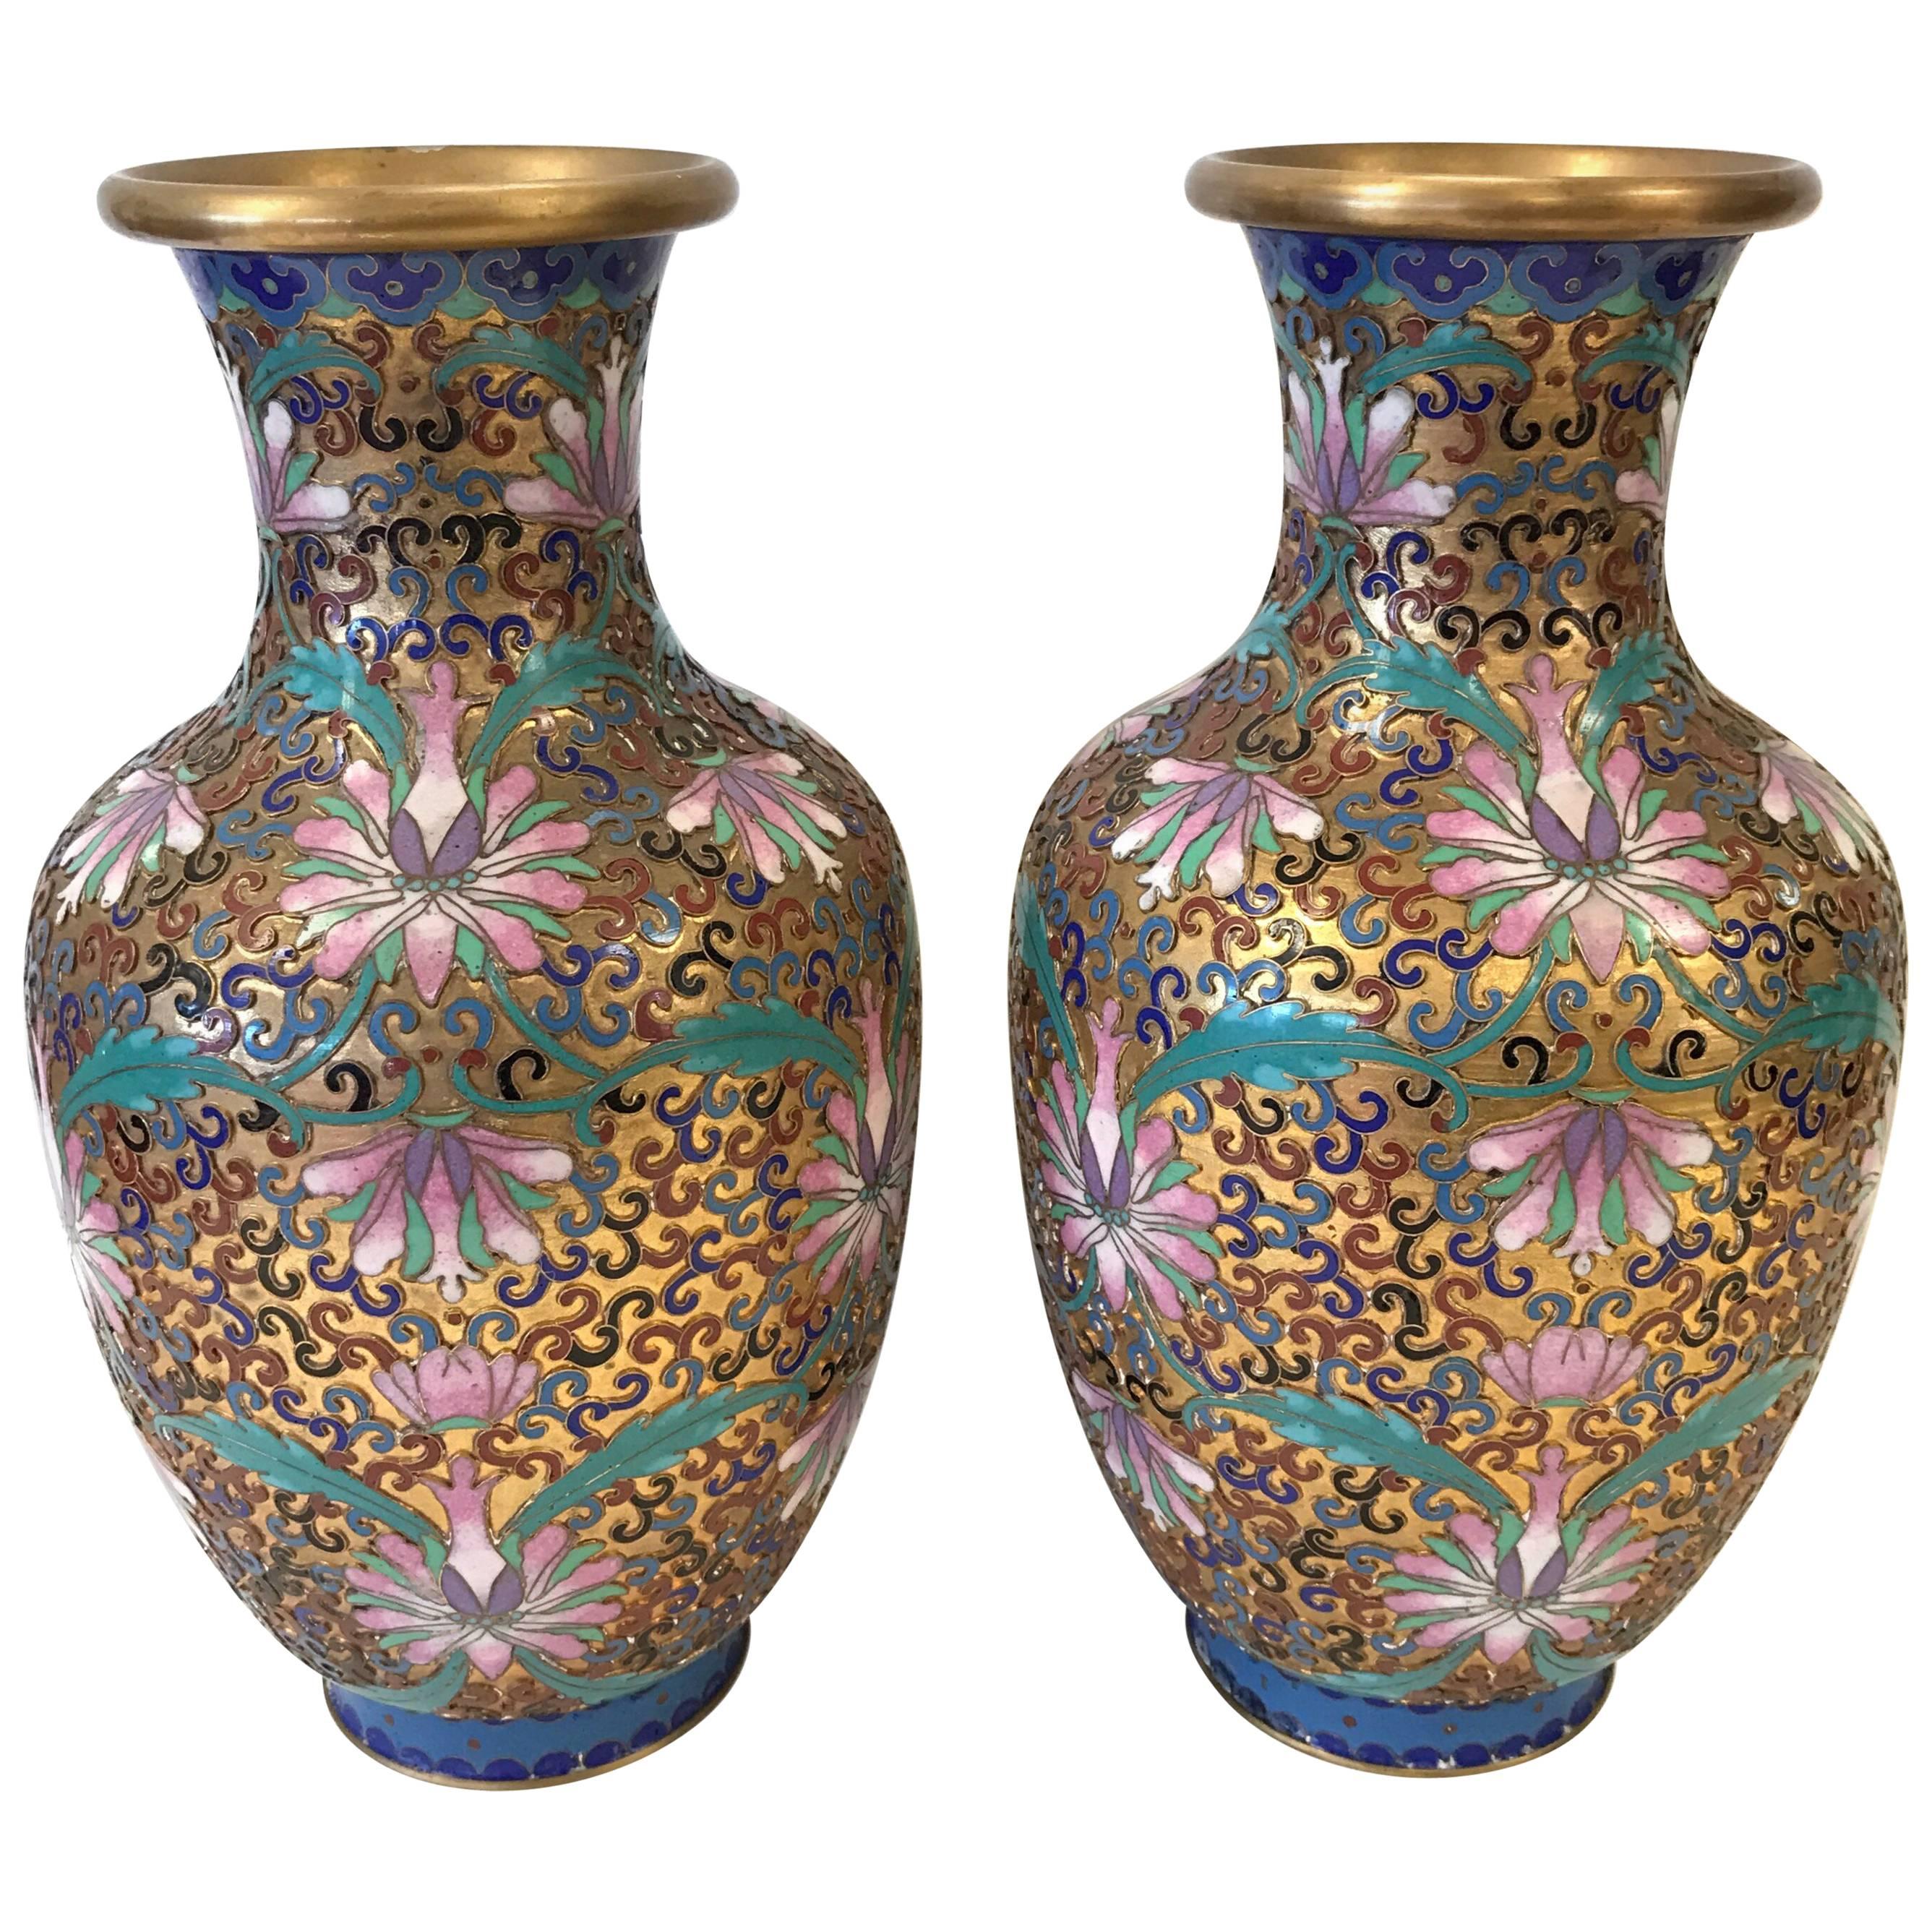 Pair of Chinese Cloisonne Urns Vases